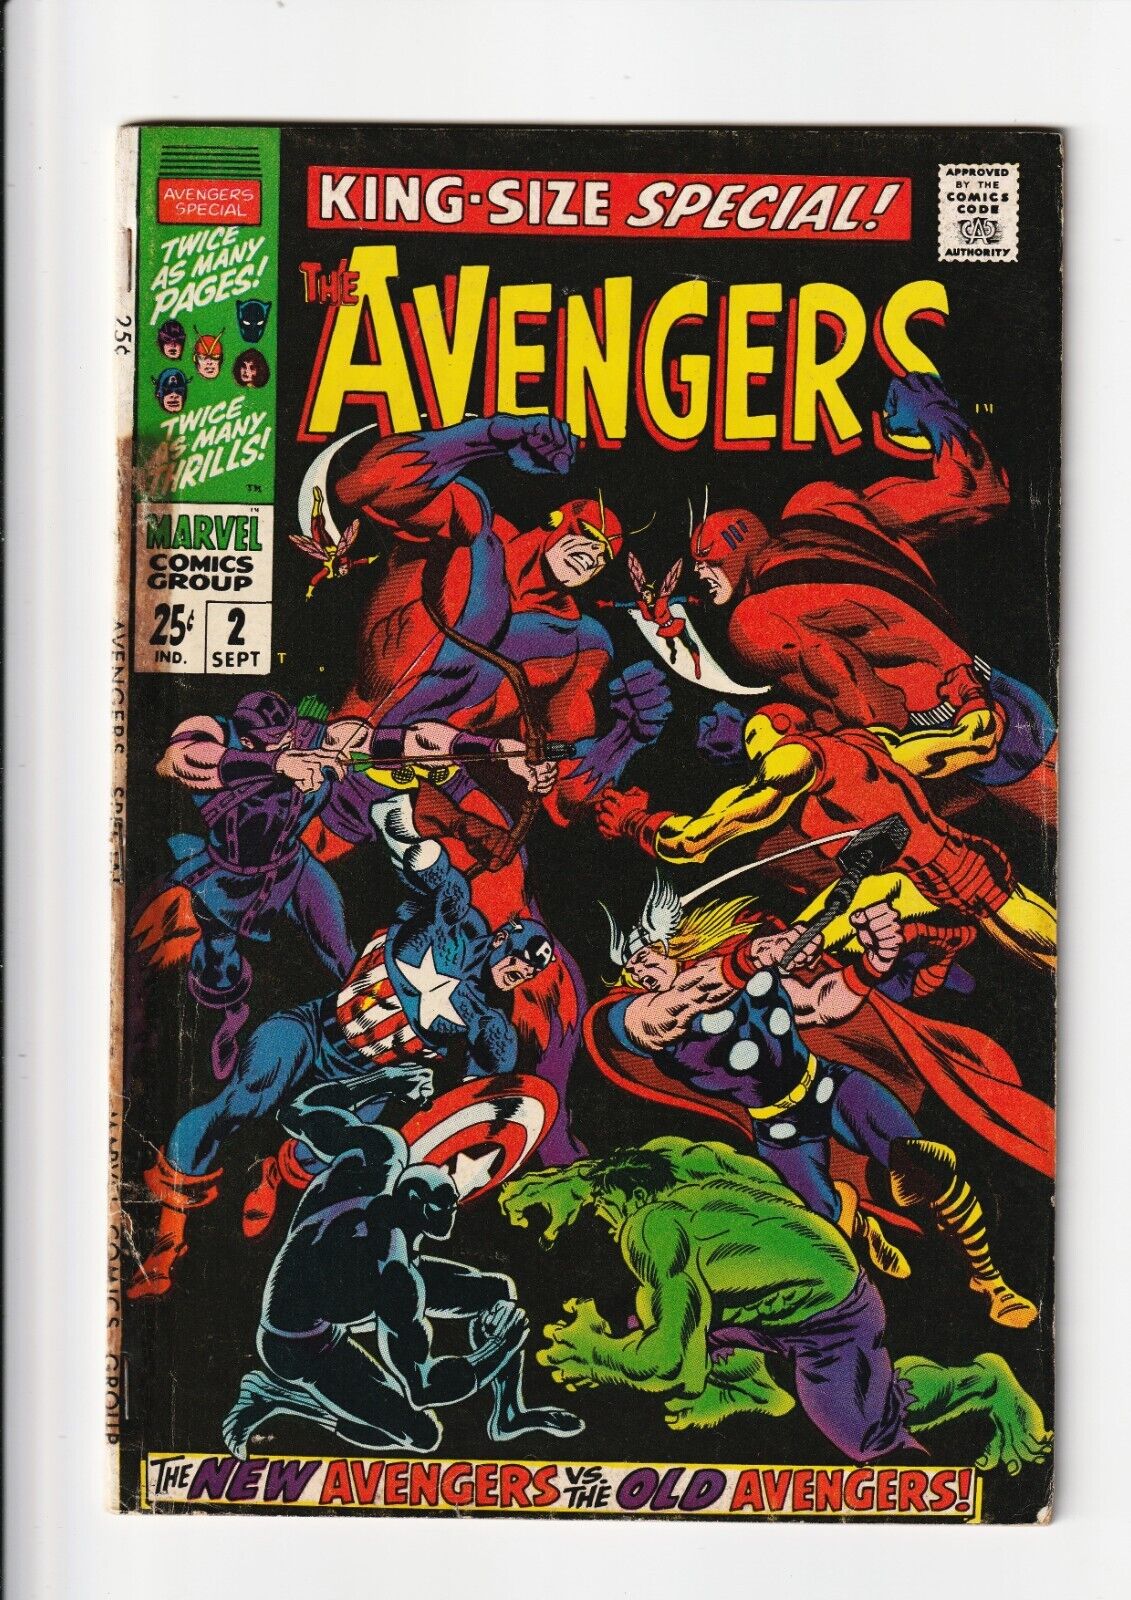 The Avengers King-Size Special #2 Marvel Comics 1968 Silver Age Annual